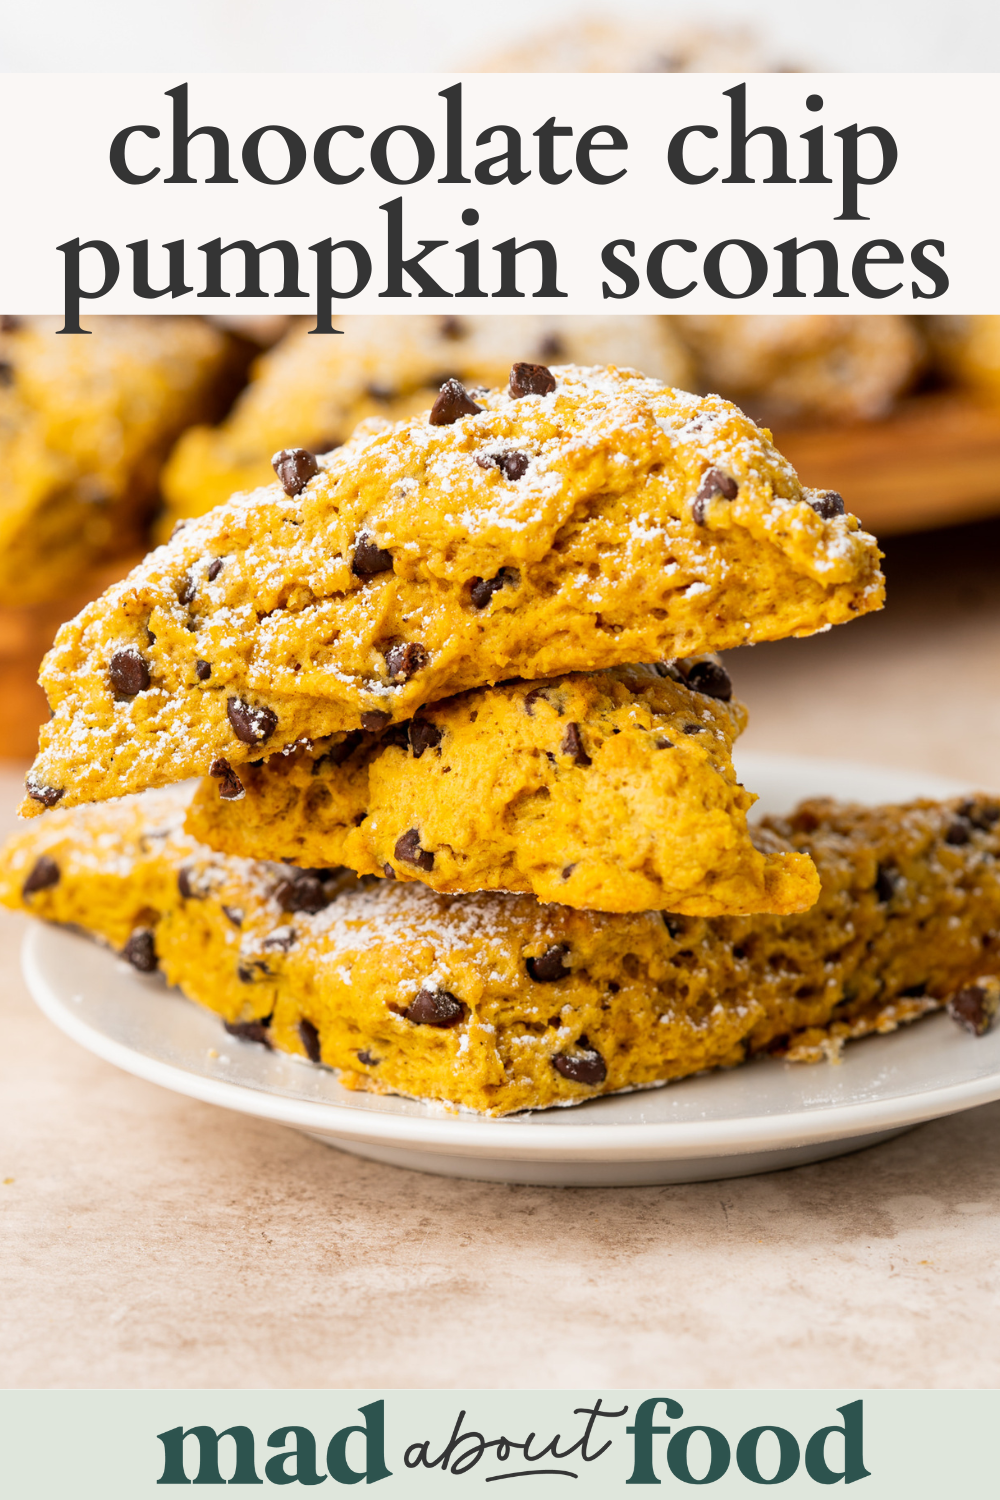 Image for pinning Chocolate Chip Pumpkin Scones recipe on Pinterest